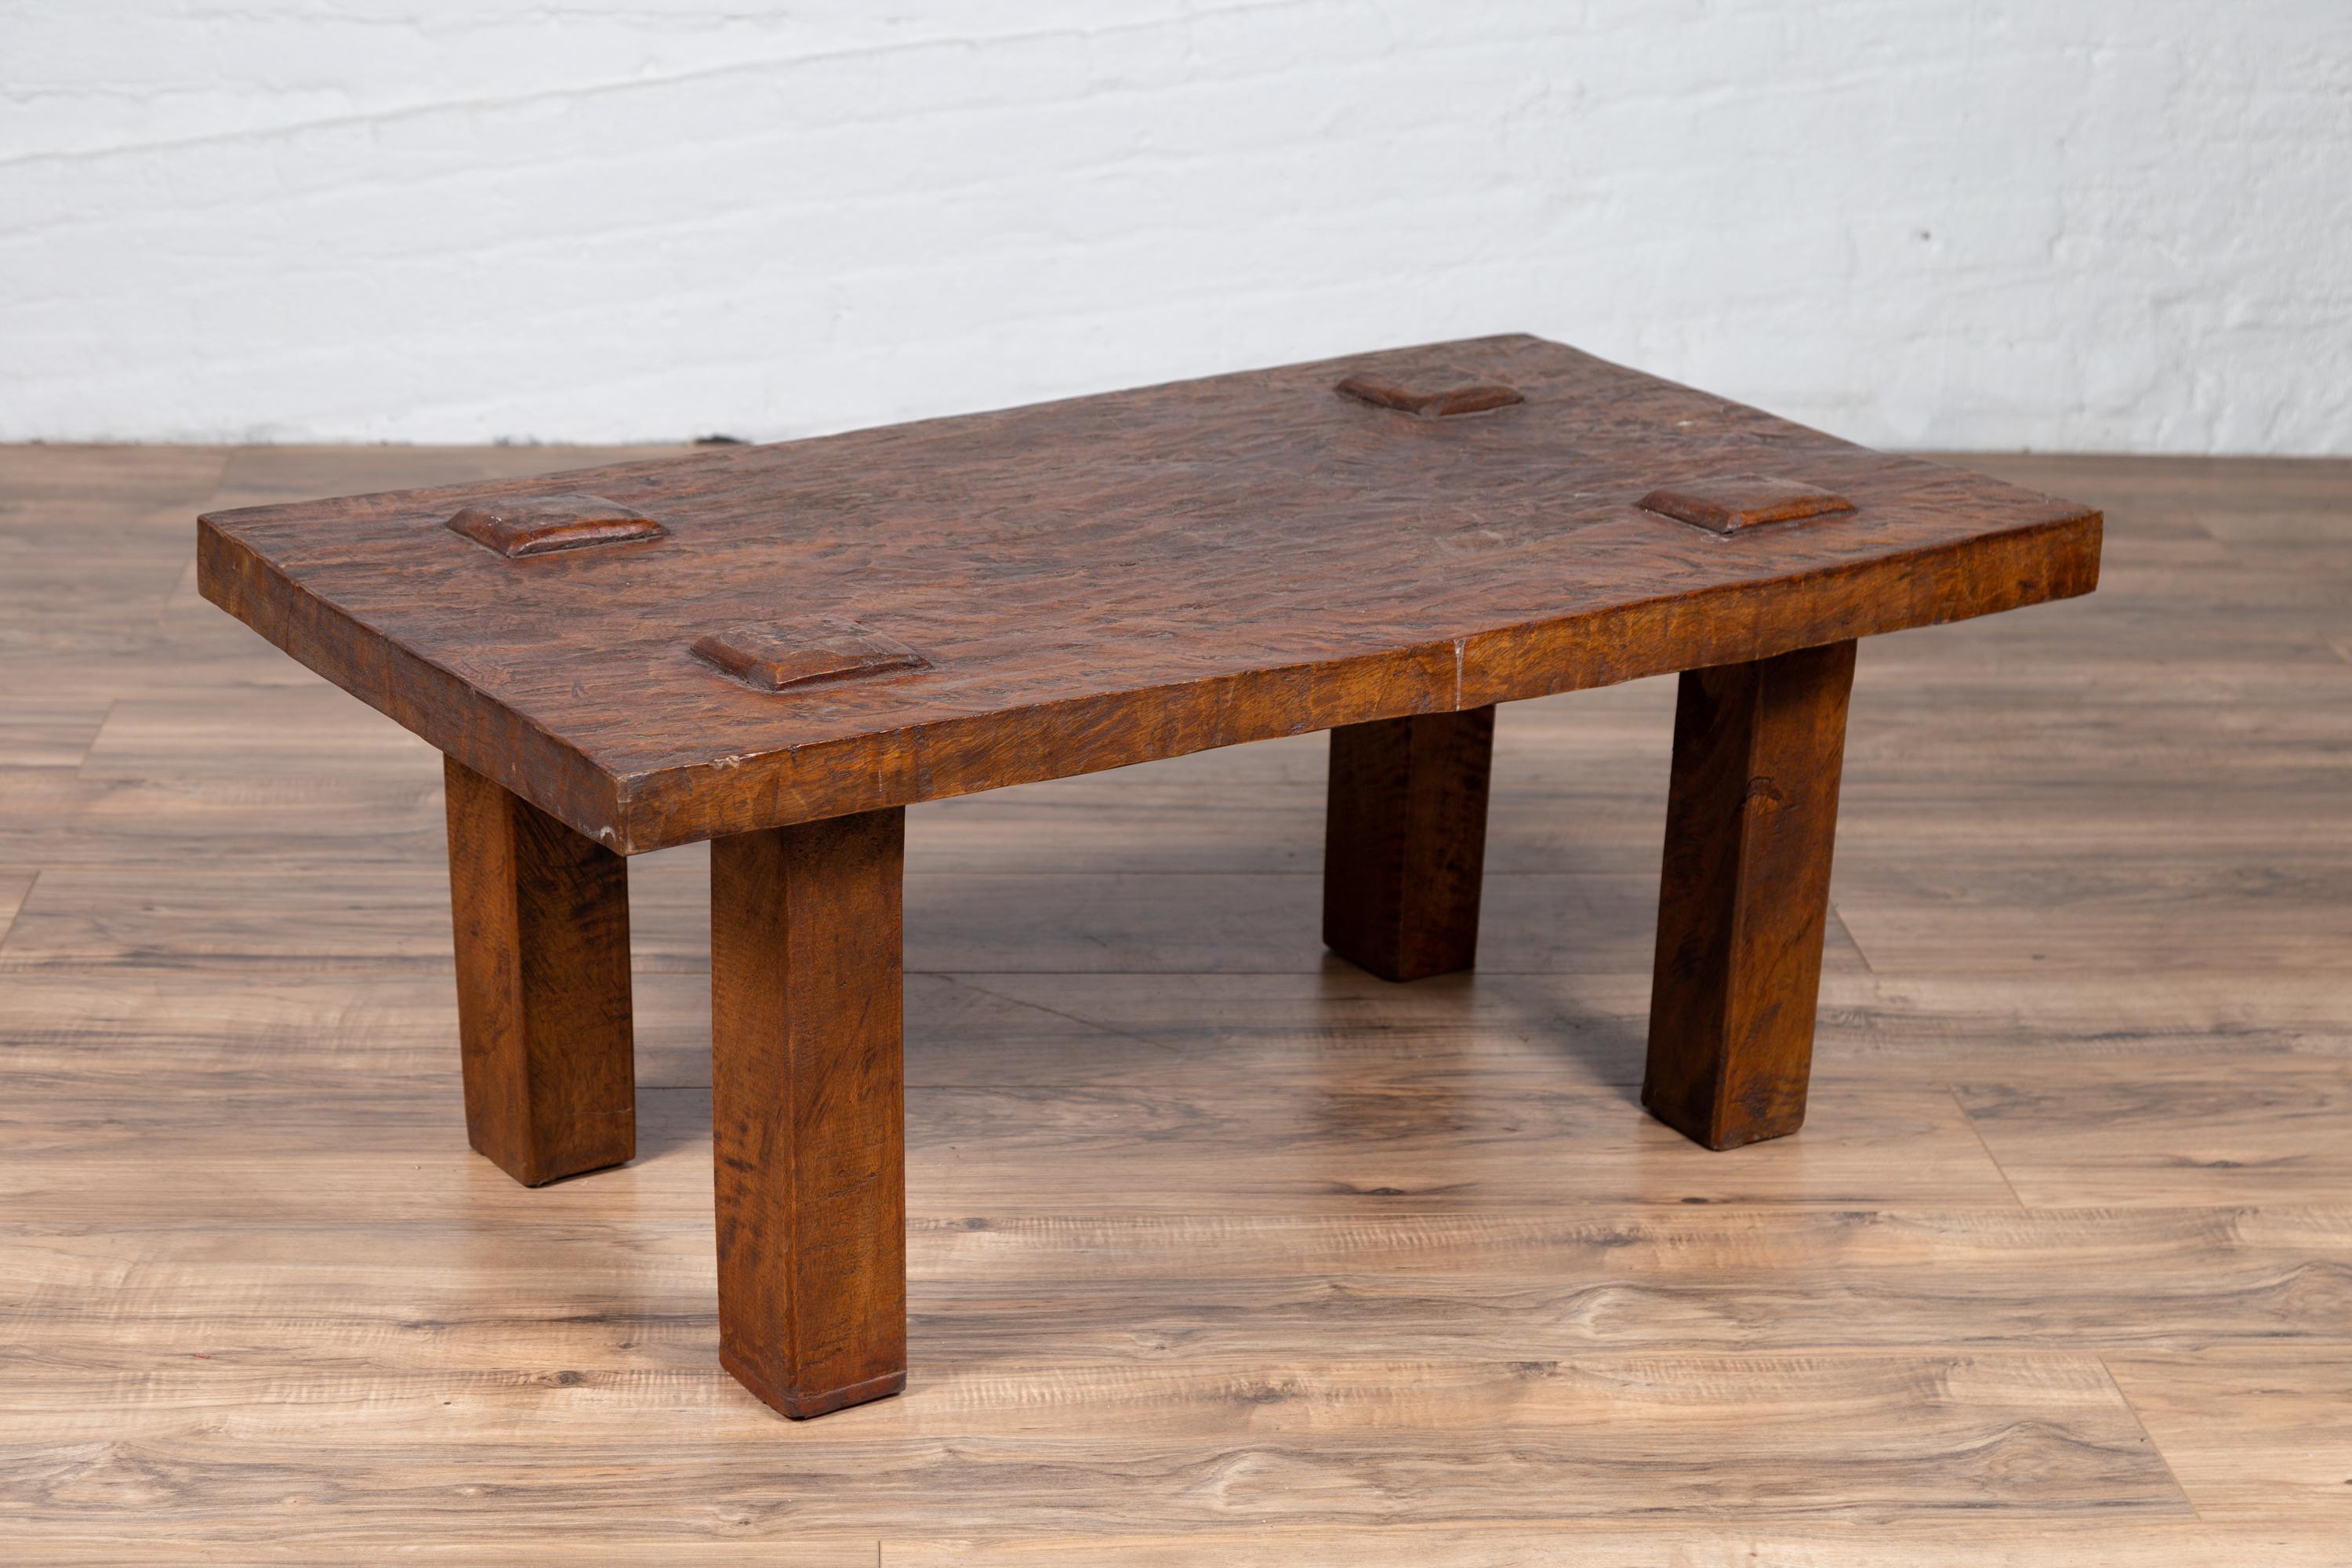 Vintage Indonesian Rustic Wooden Coffee Table with Square Legs and Raised Joints 4